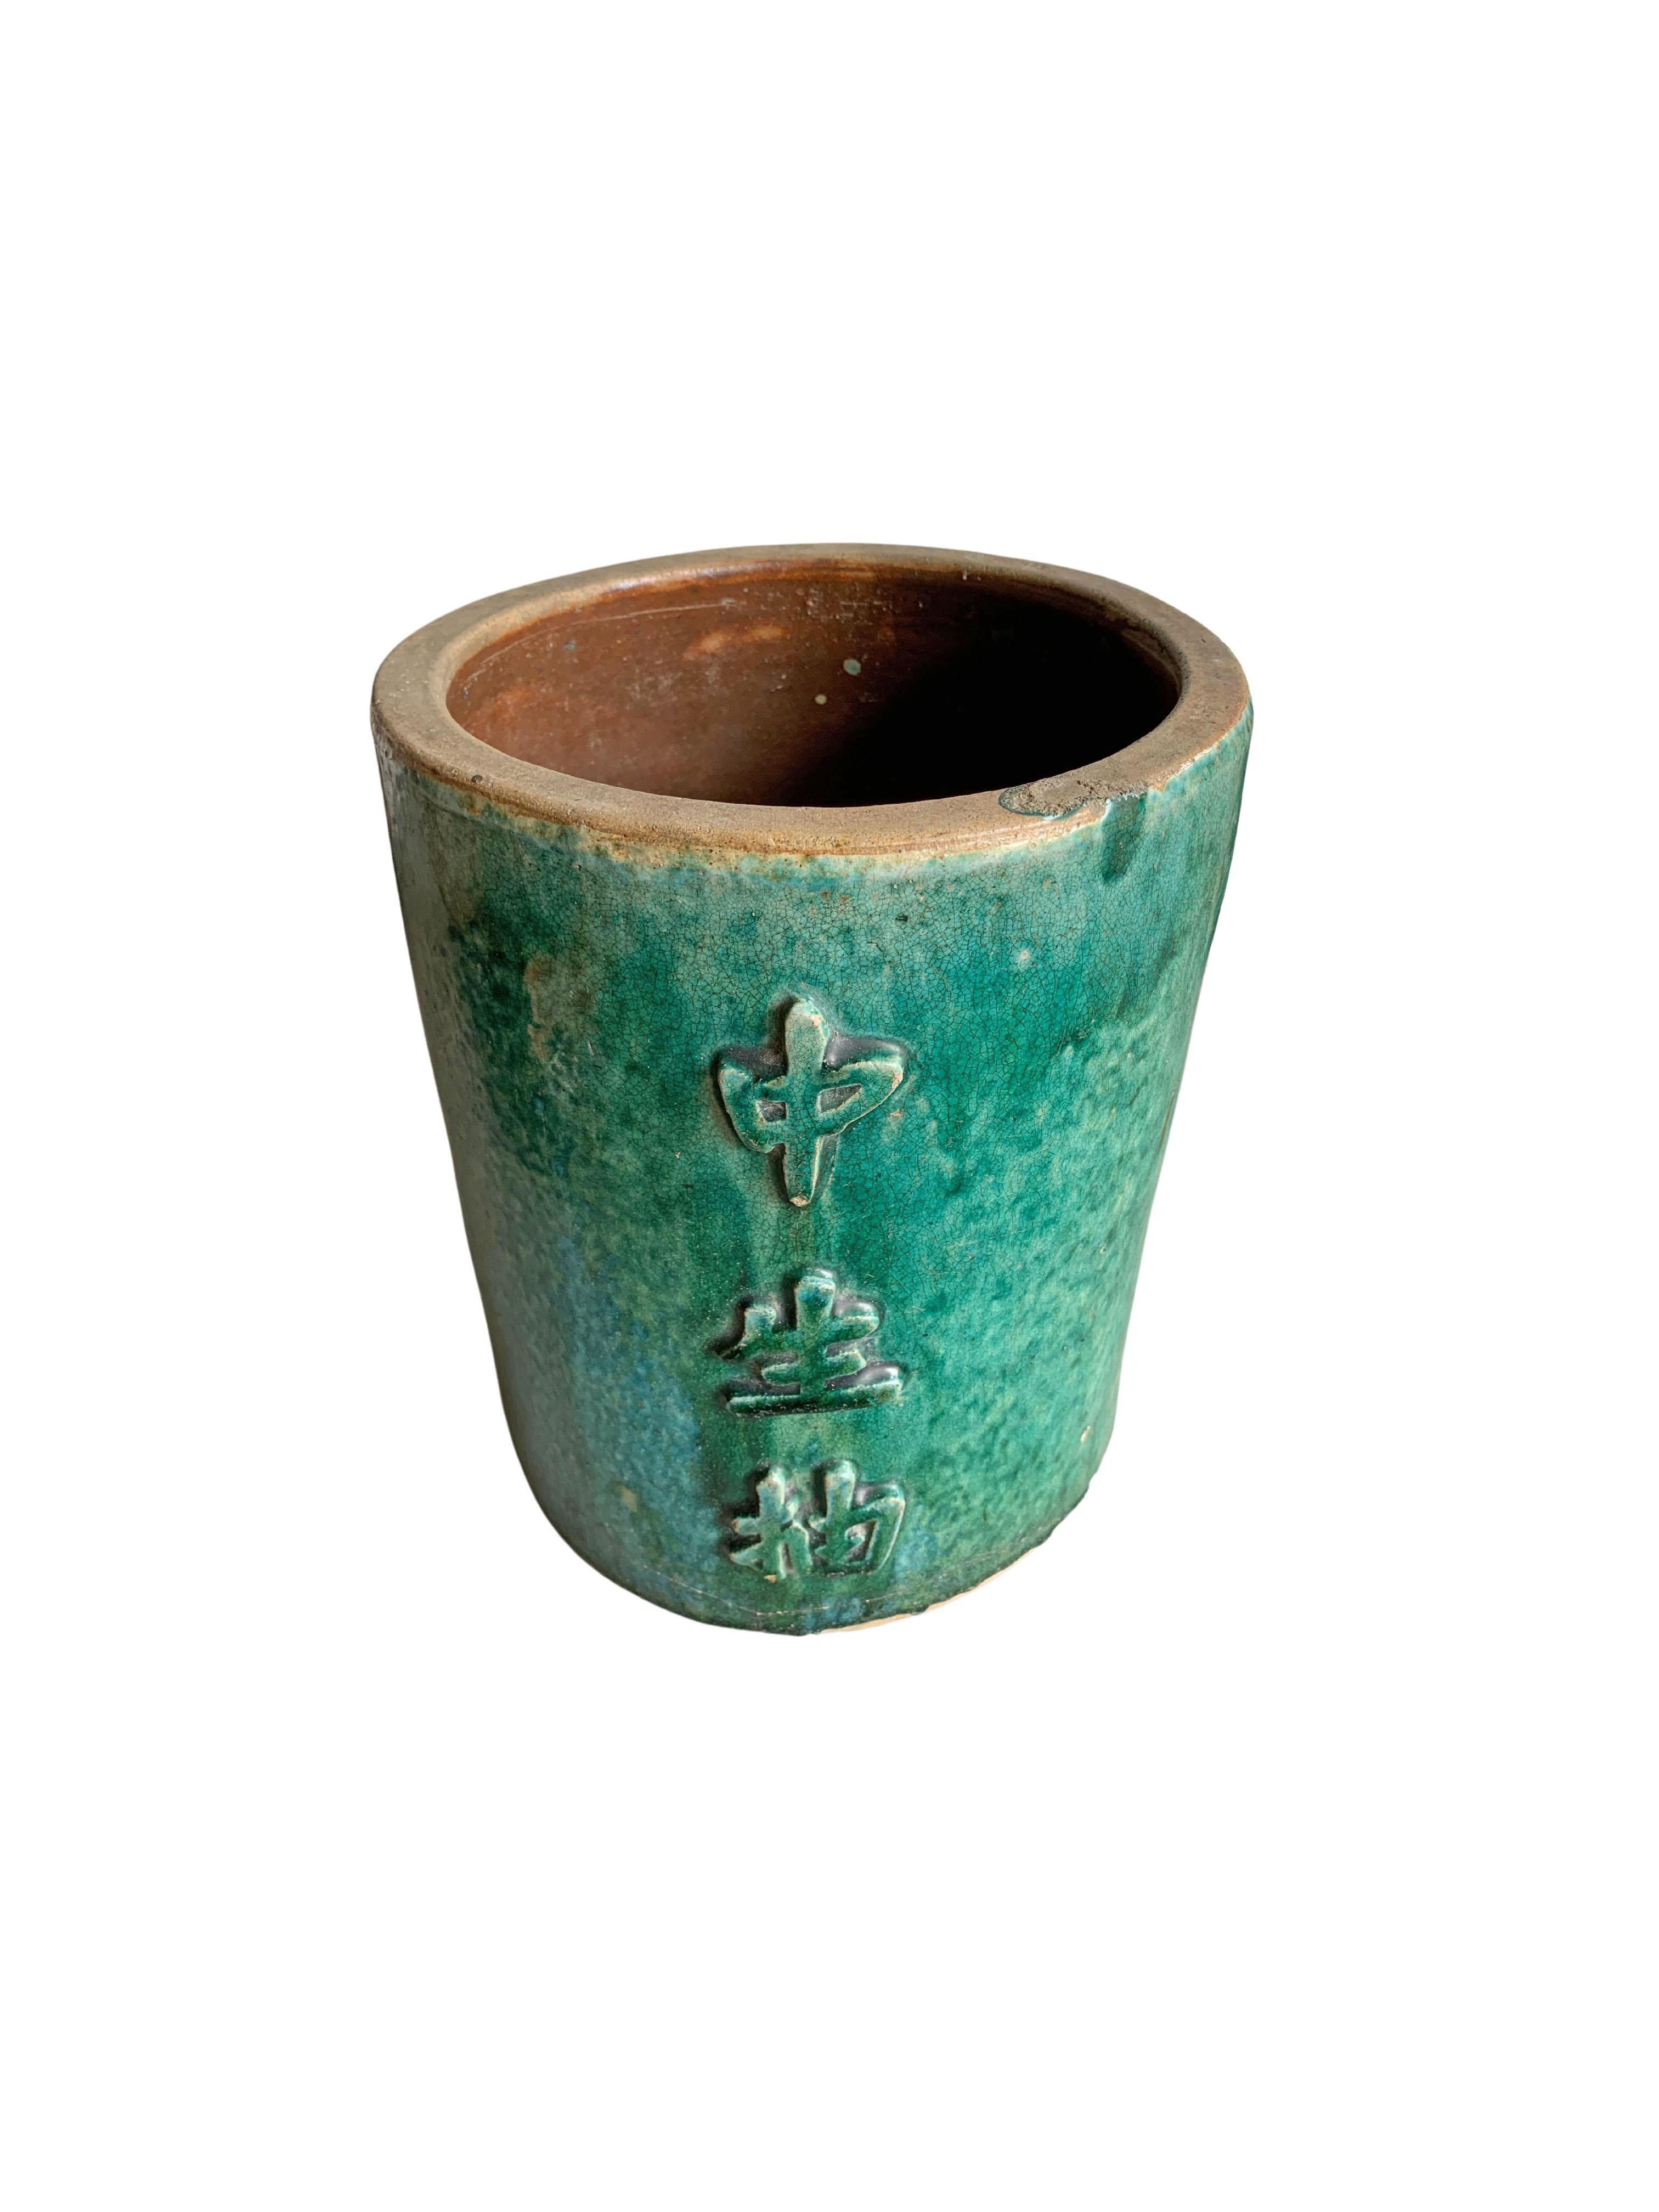 Qing Chinese Green Glazed Ceramic Soy Sauce Storage Jar / Planter, c. 1900 For Sale